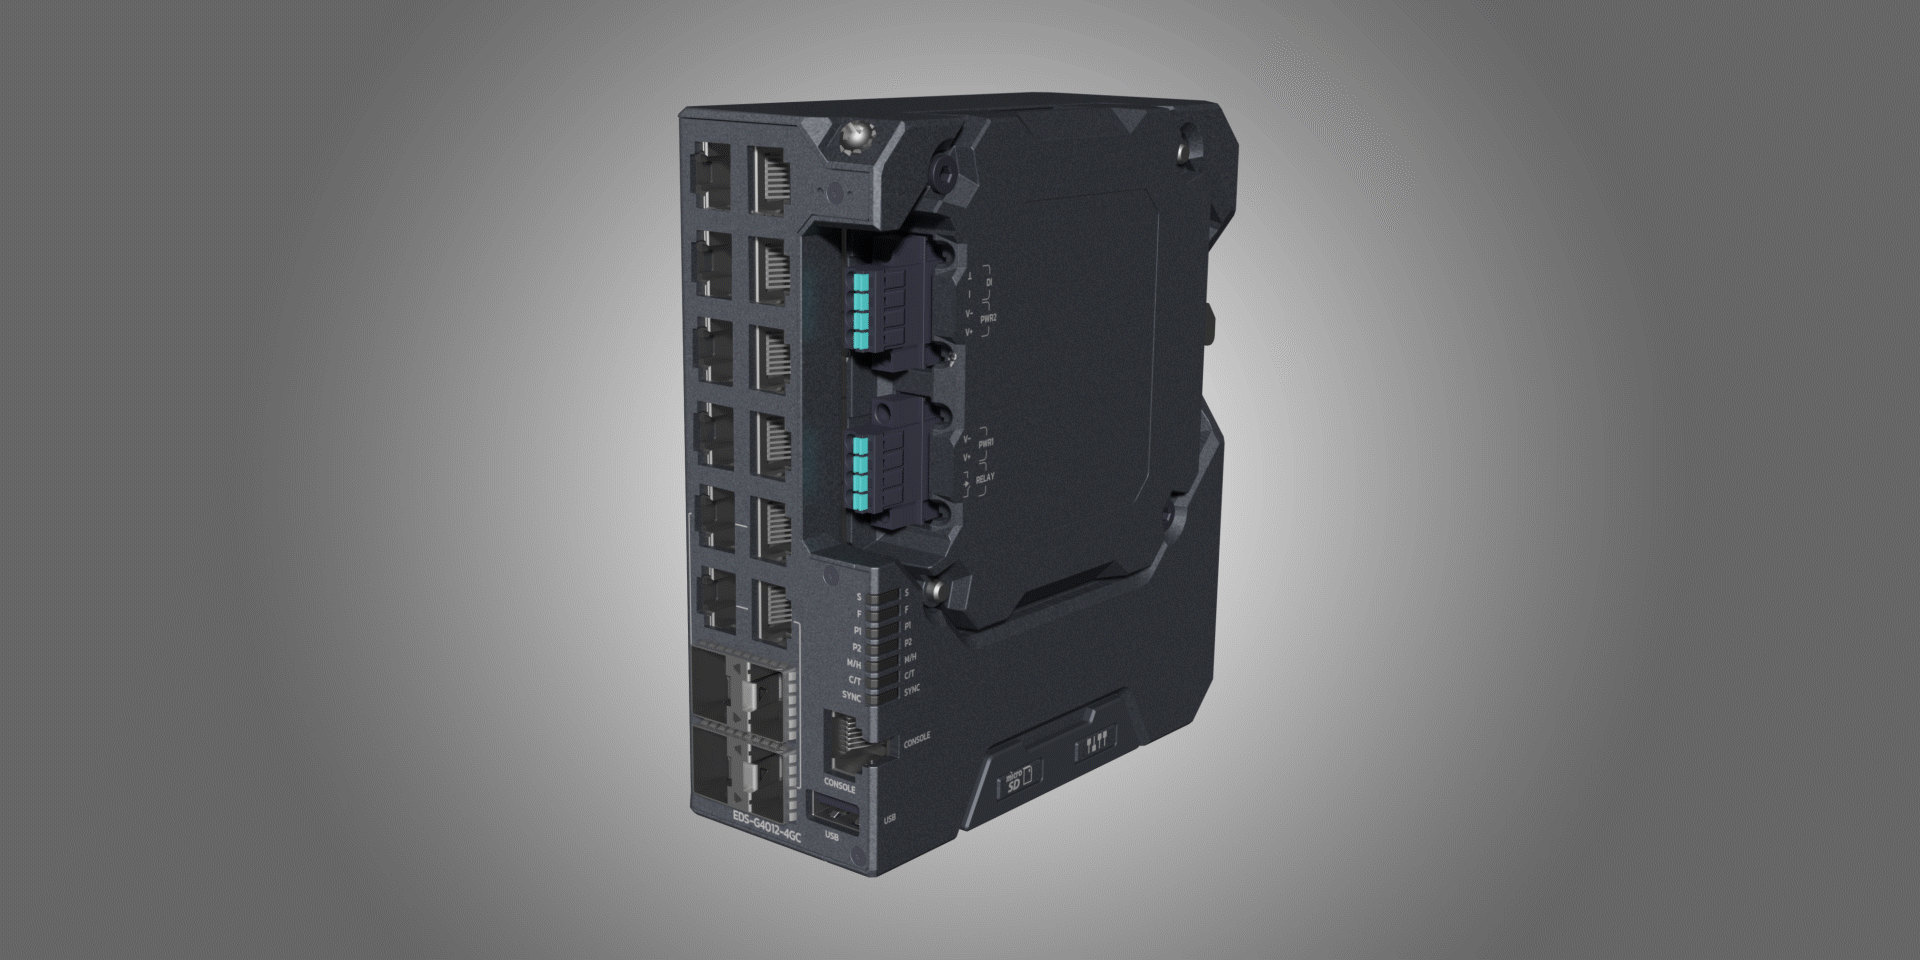 Our Modular Power Design Provides Flexible Options for Multiple Applications